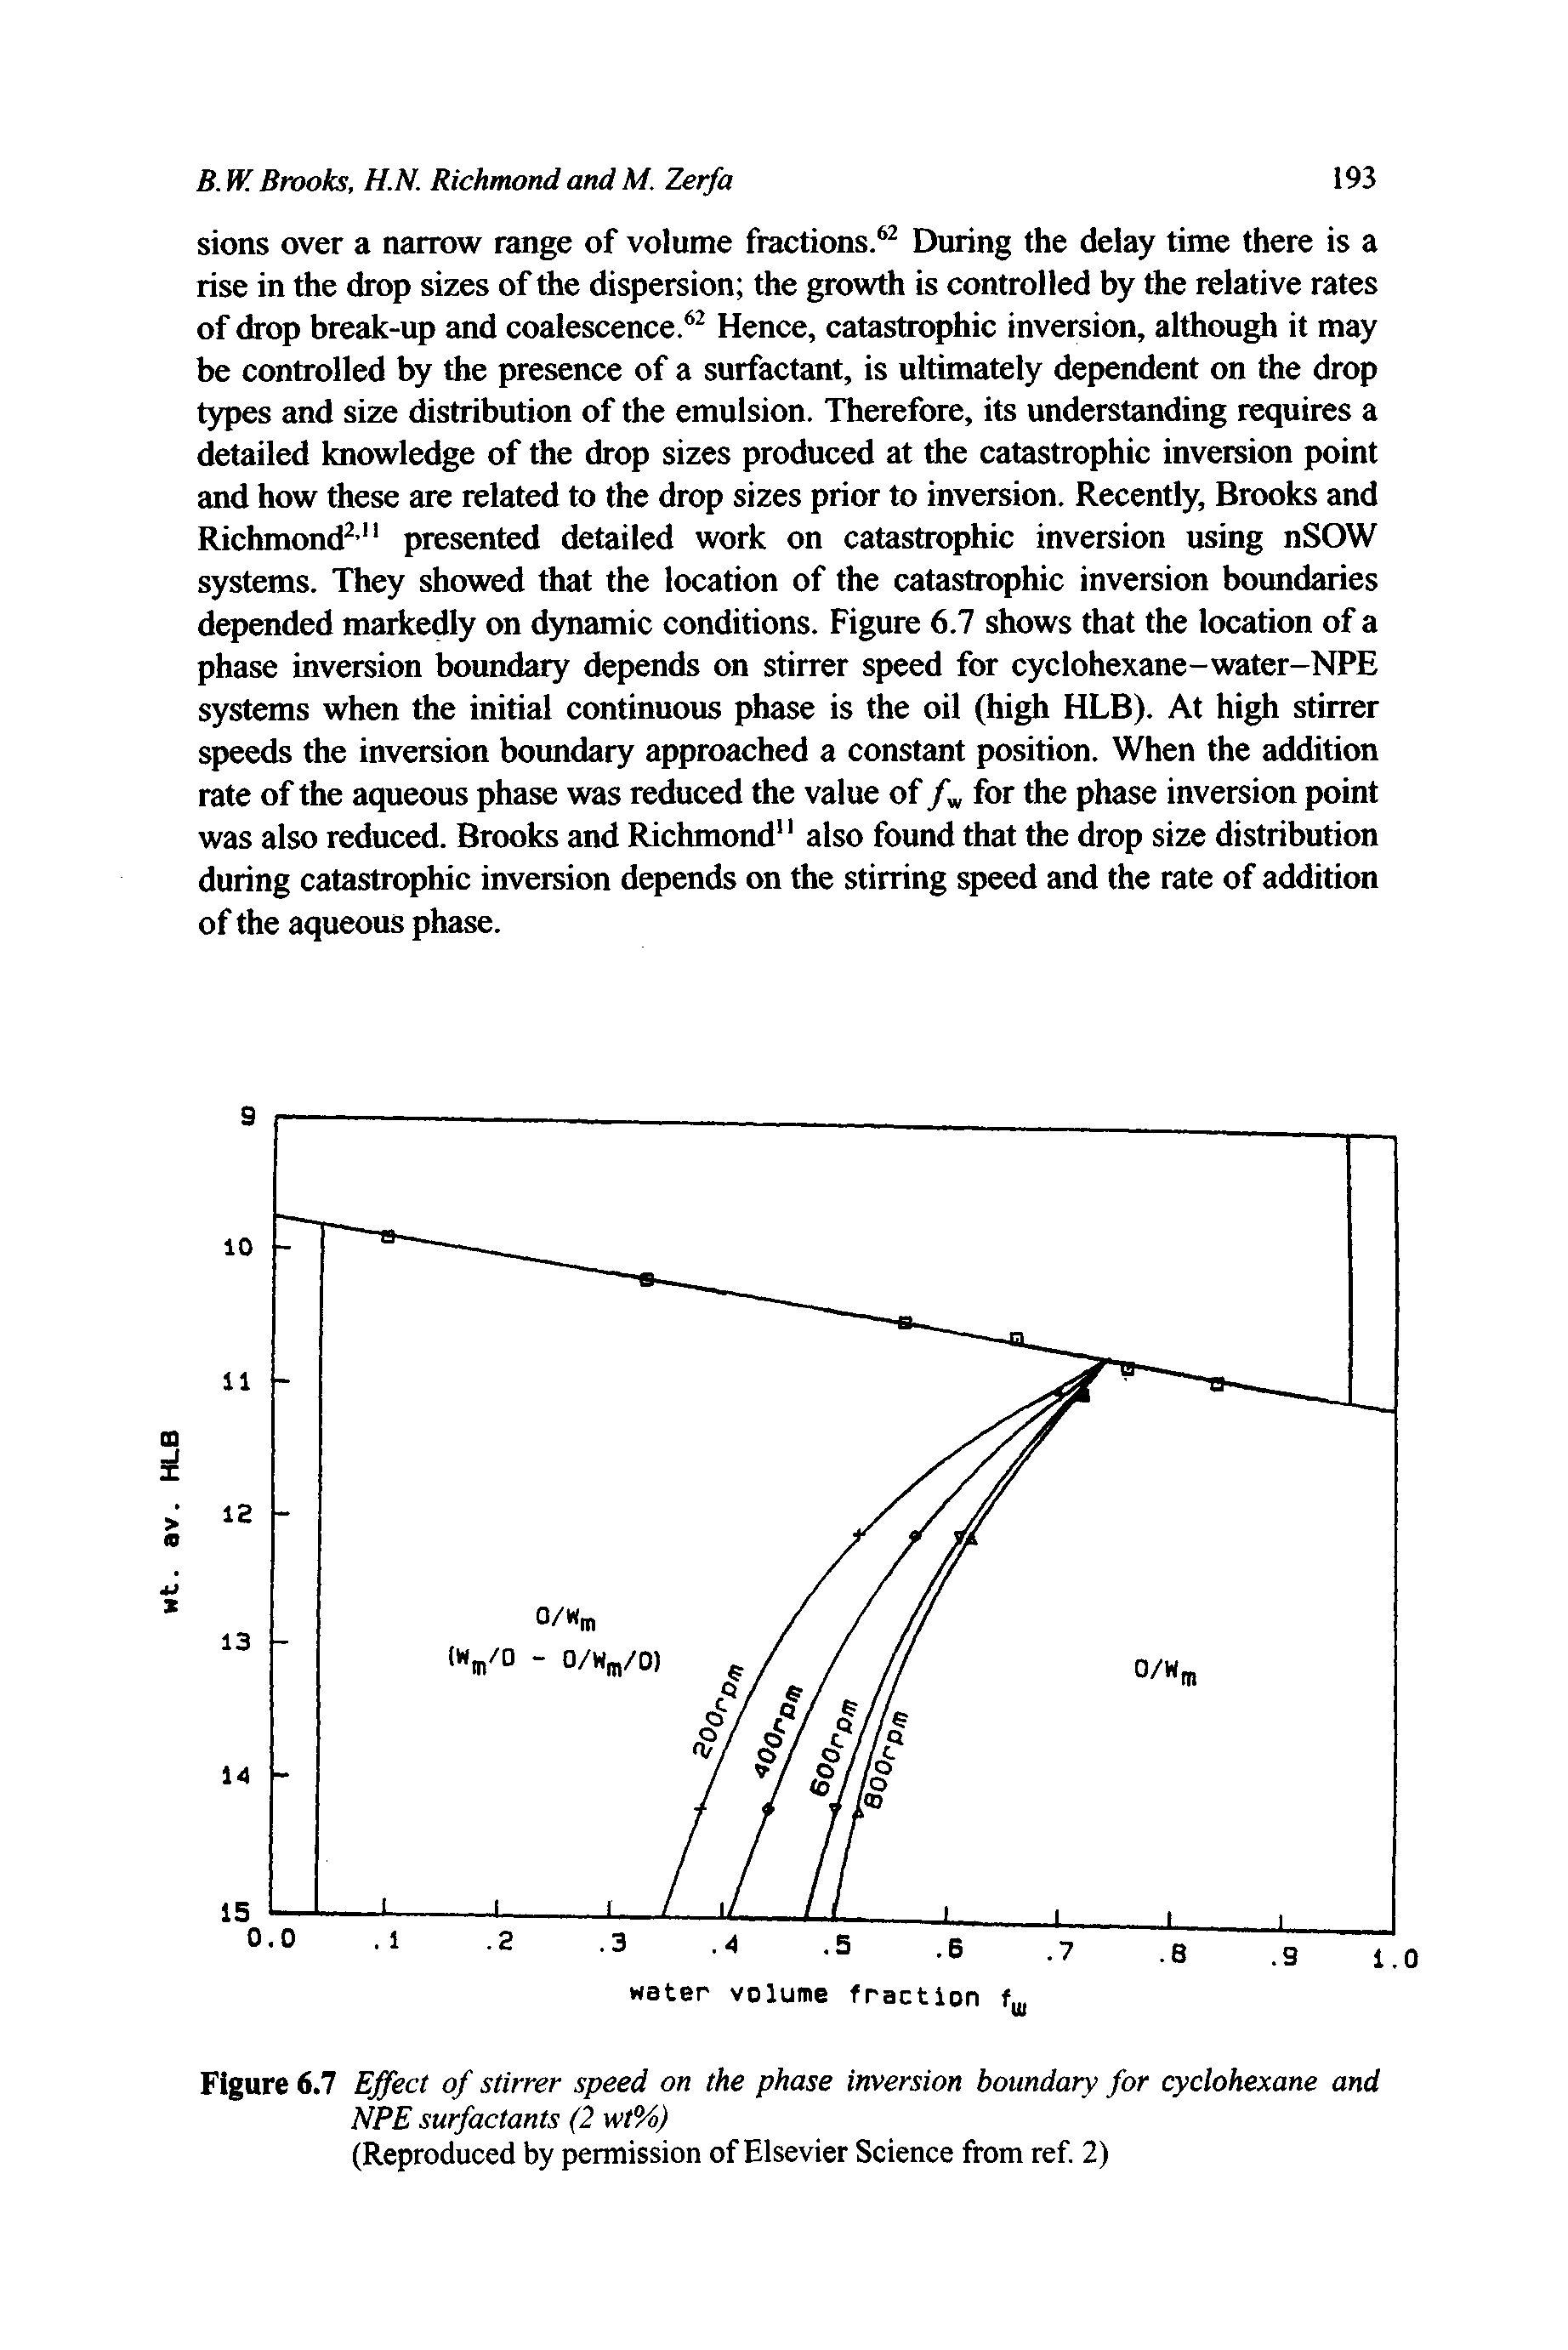 Figure 6.7 Effect of stirrer speed on the phase inversion boundary for cyclohexane and NPE surfactants (2 wt%)...